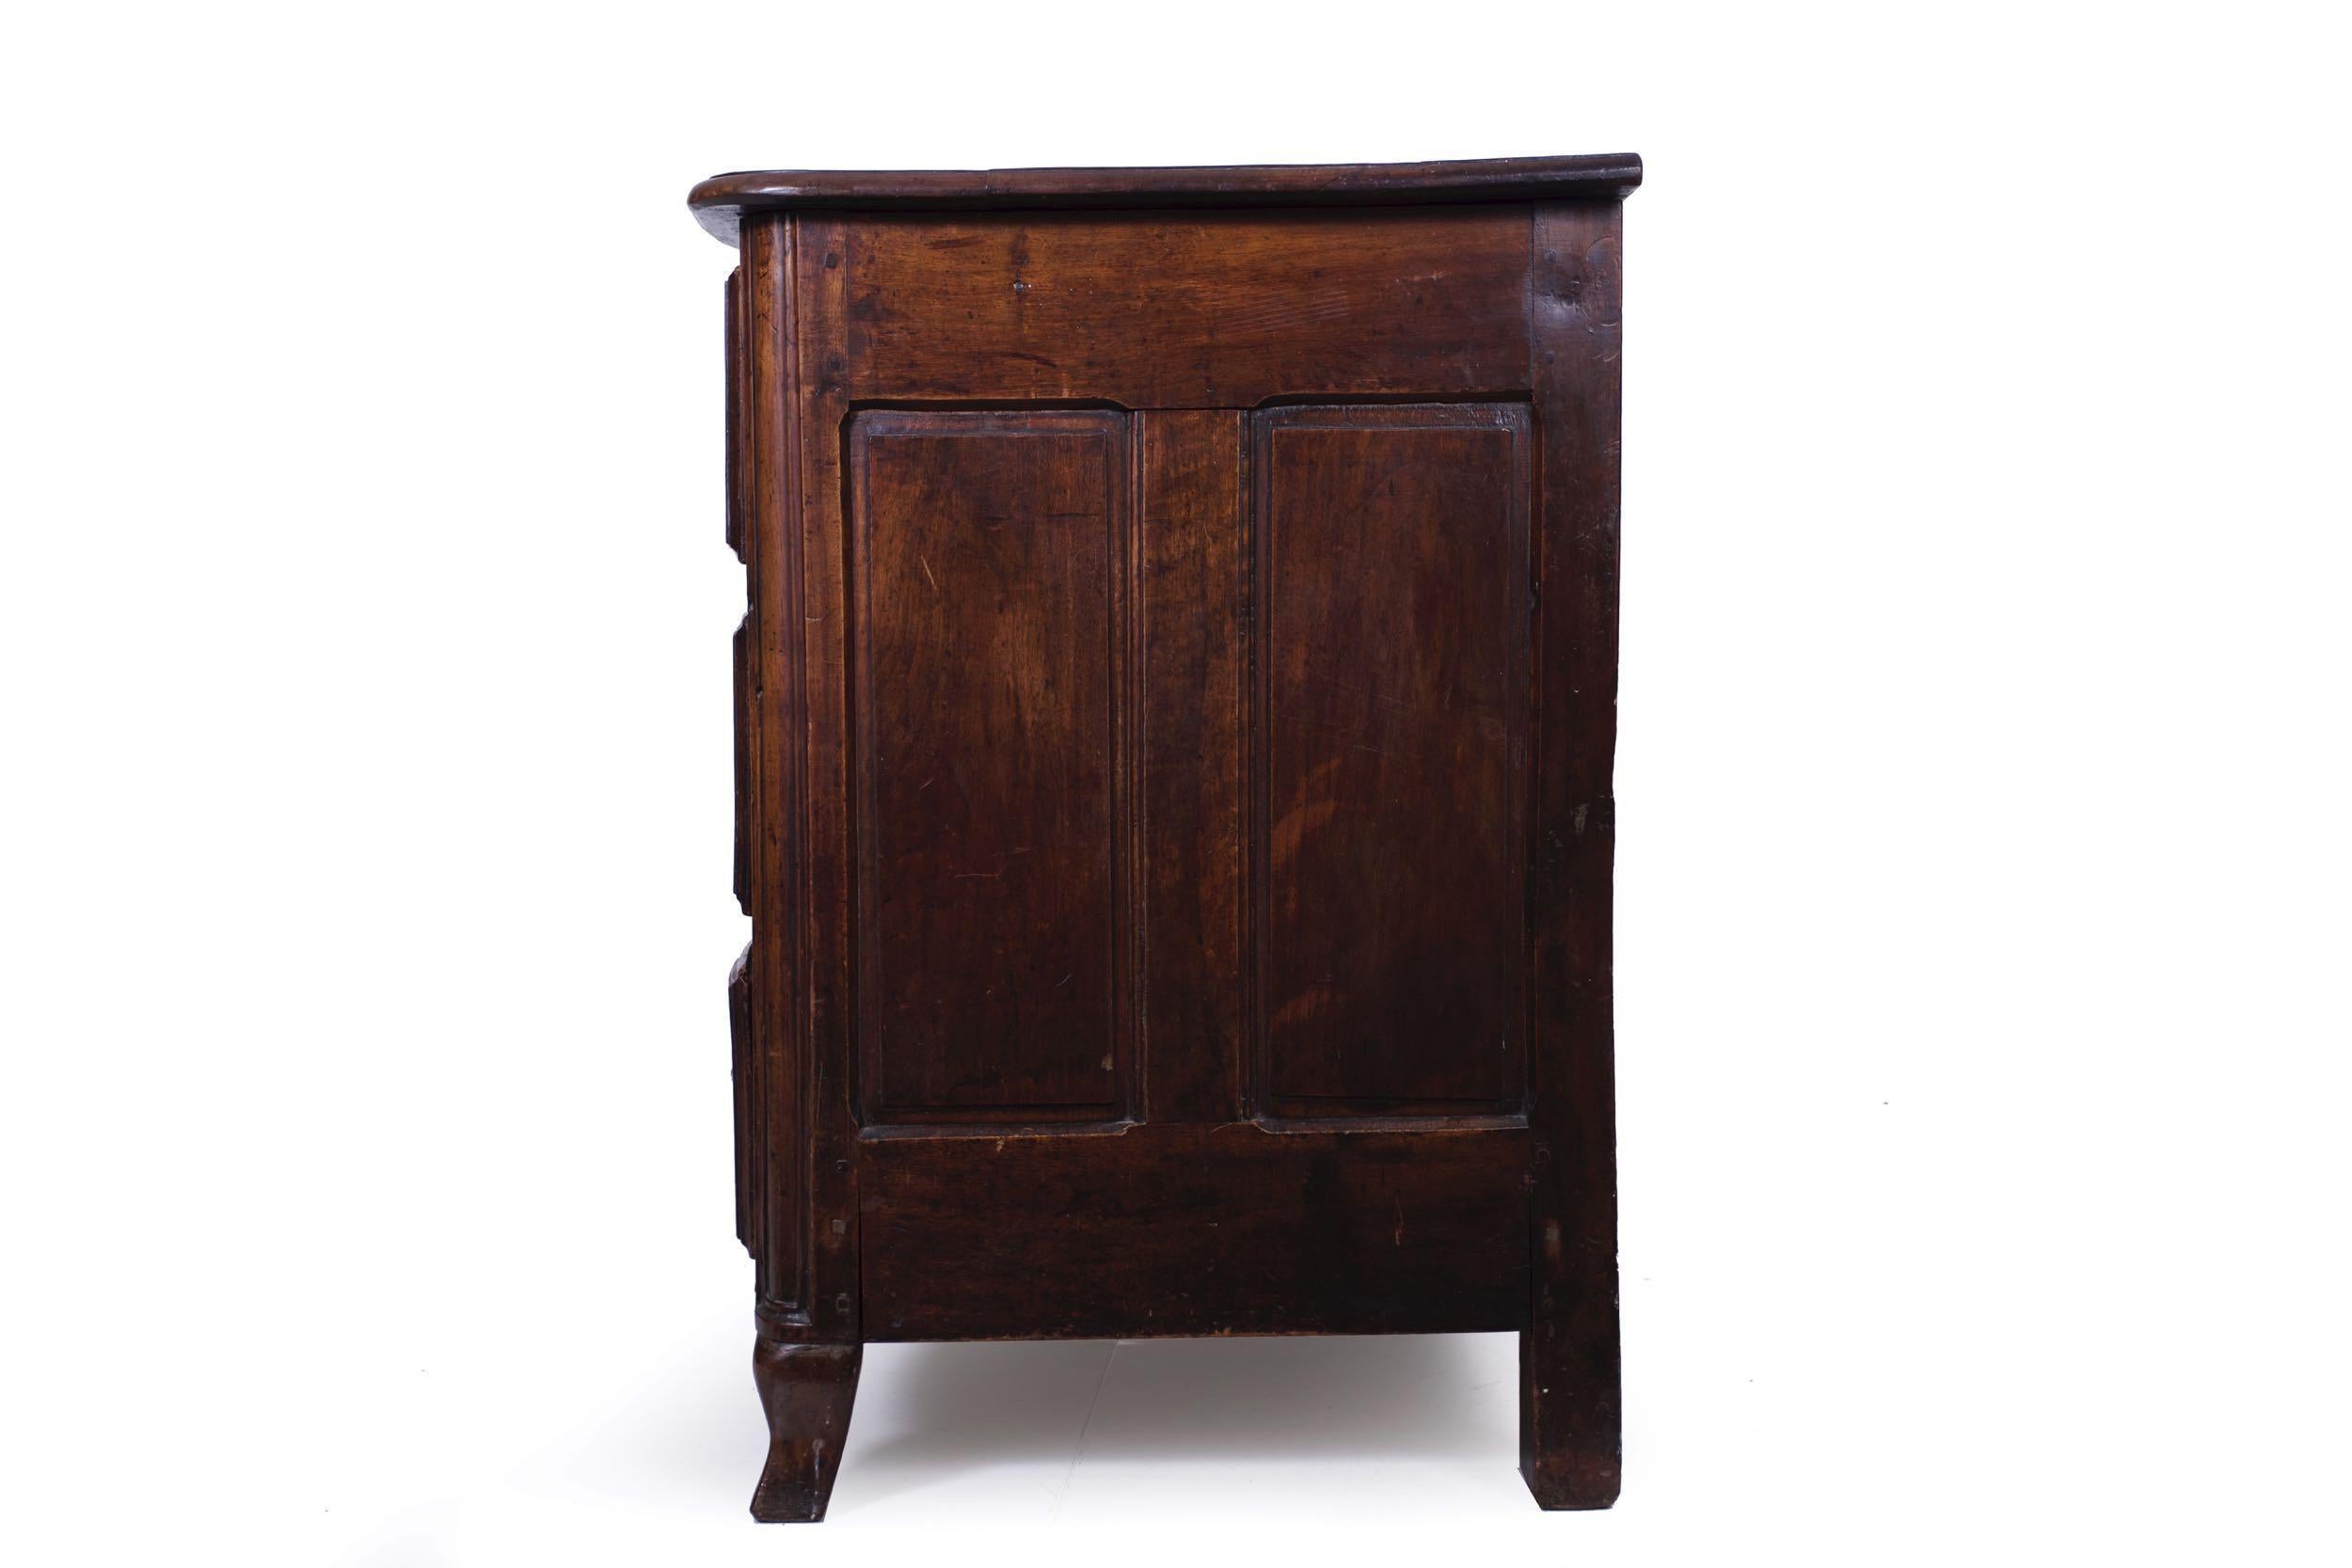 18th Century Regencé Period Walnut Commode Chest of Drawers, circa 1730-1750 In Good Condition For Sale In Shippensburg, PA